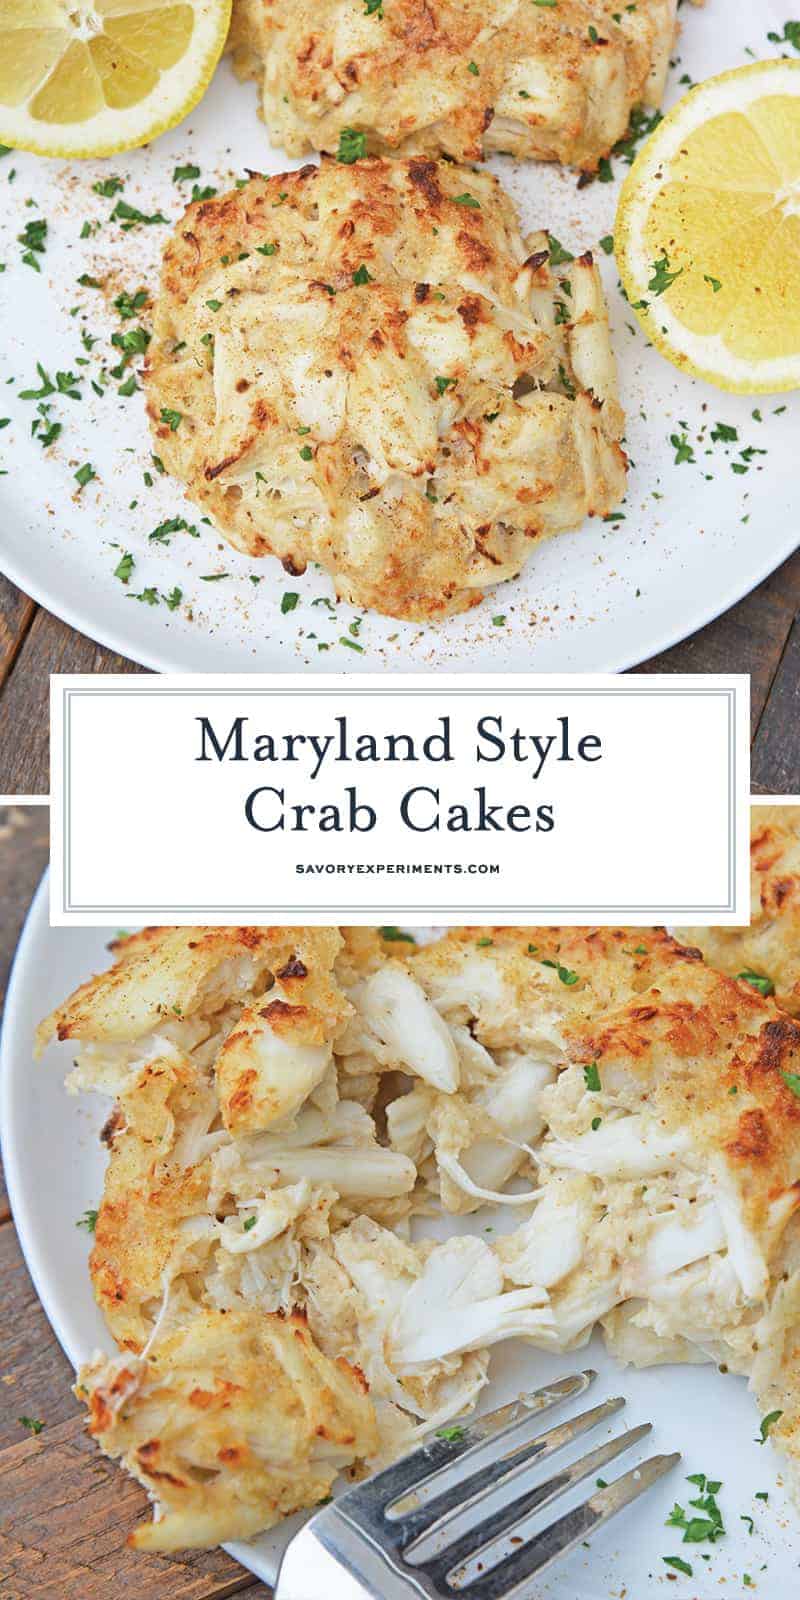 Maryland Crab Cakes are made with jumbo lump crab meat with little filler, Dijon mustard and Old Bay Seasoning plus secrets to making authentic Chesapeake crab cakes! #marylandcrabcakes #crabcakerecipe www.savoryexperiments.com